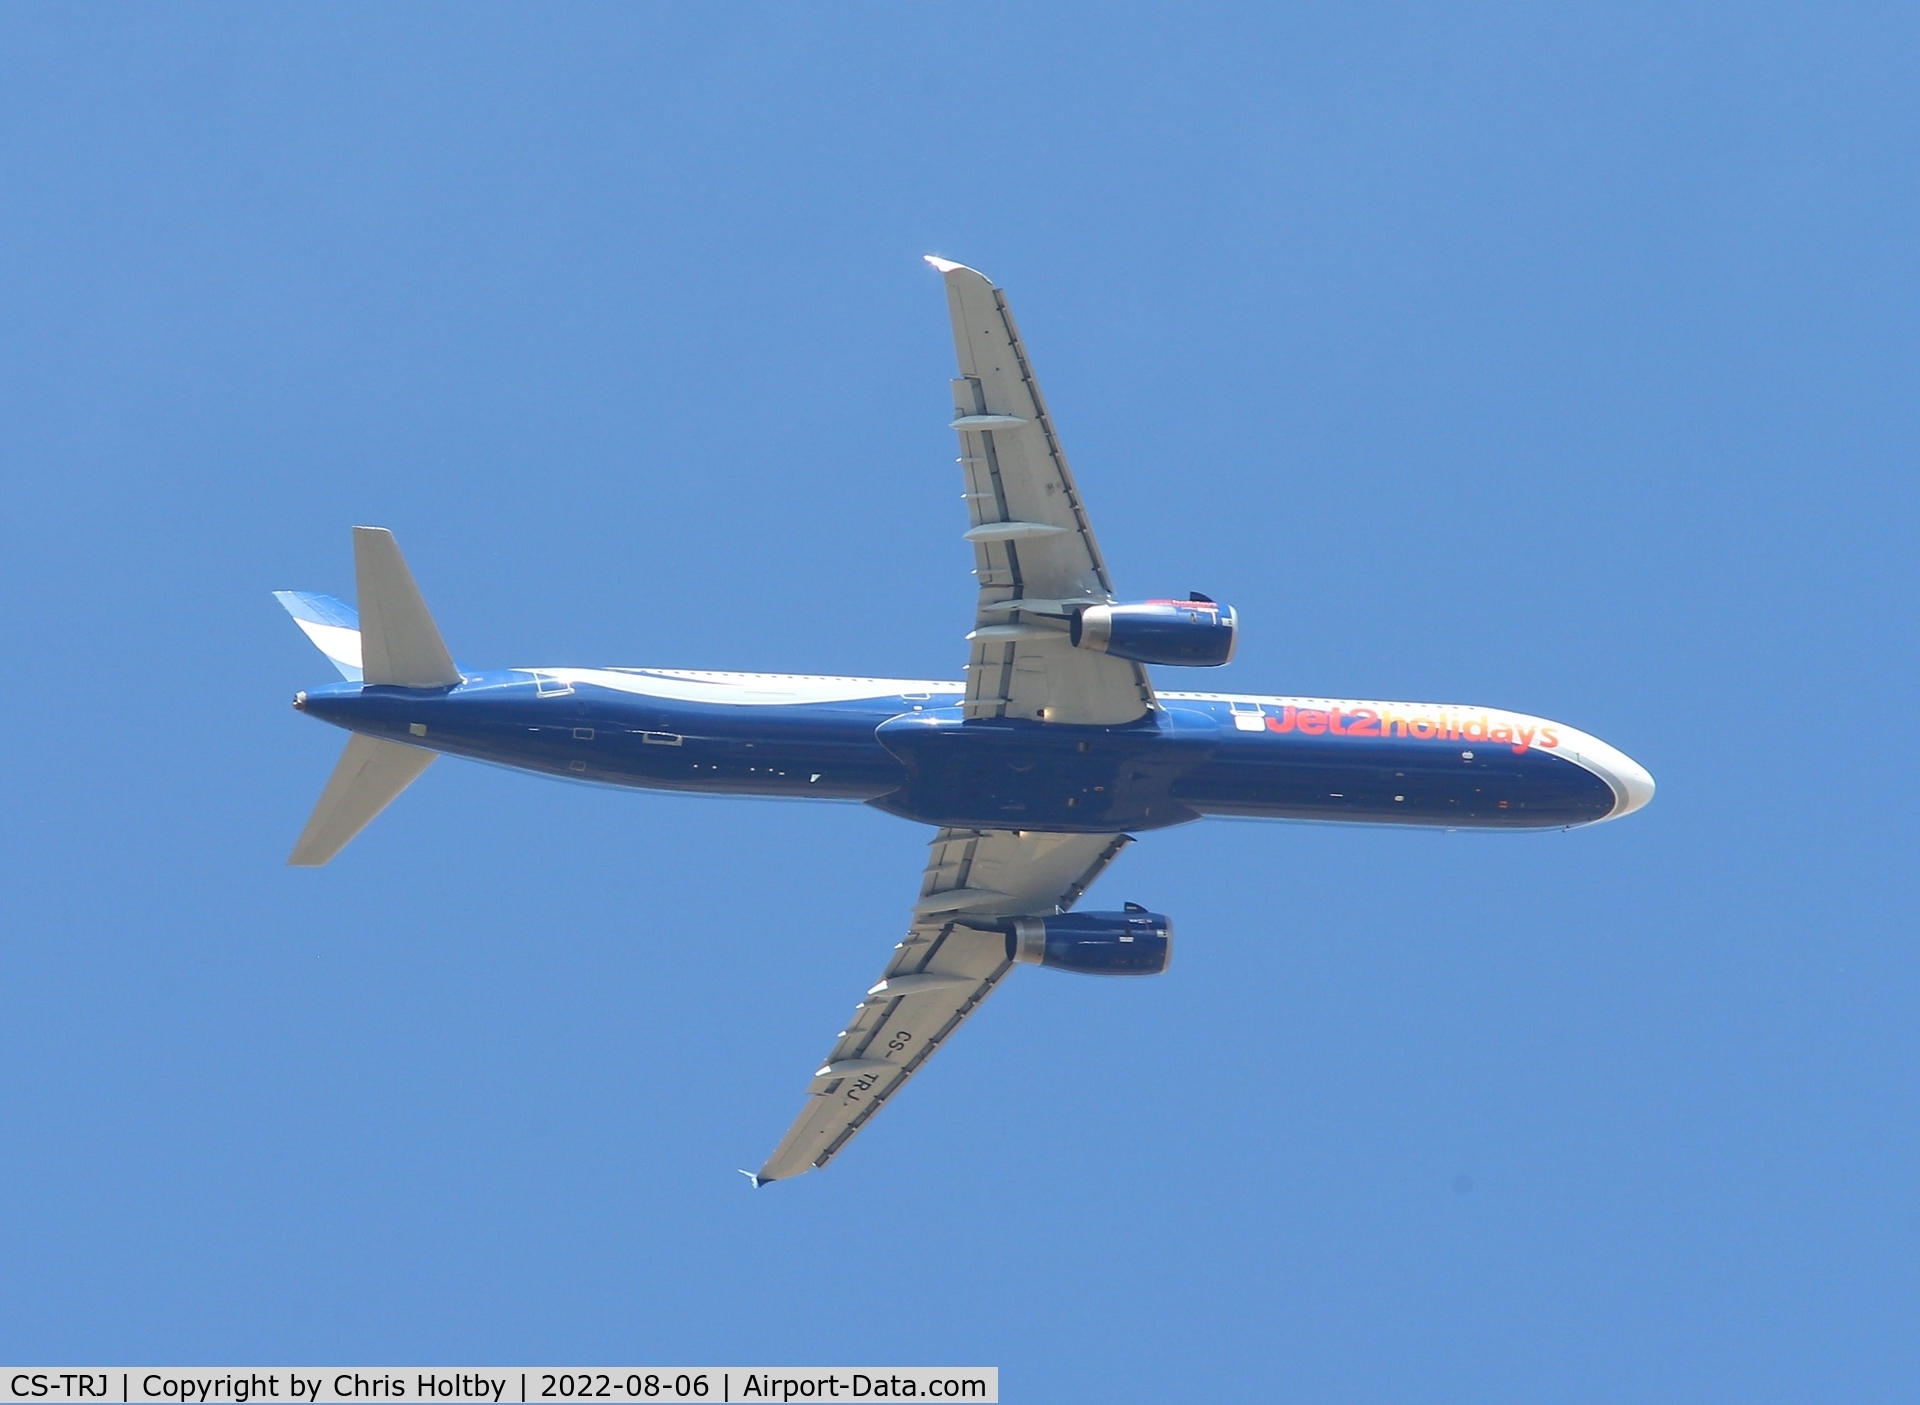 CS-TRJ, 1999 Airbus A321-231 C/N 1004, Leased by Jet2 from Hi-Fly Portugal turning into Stansted, Essex